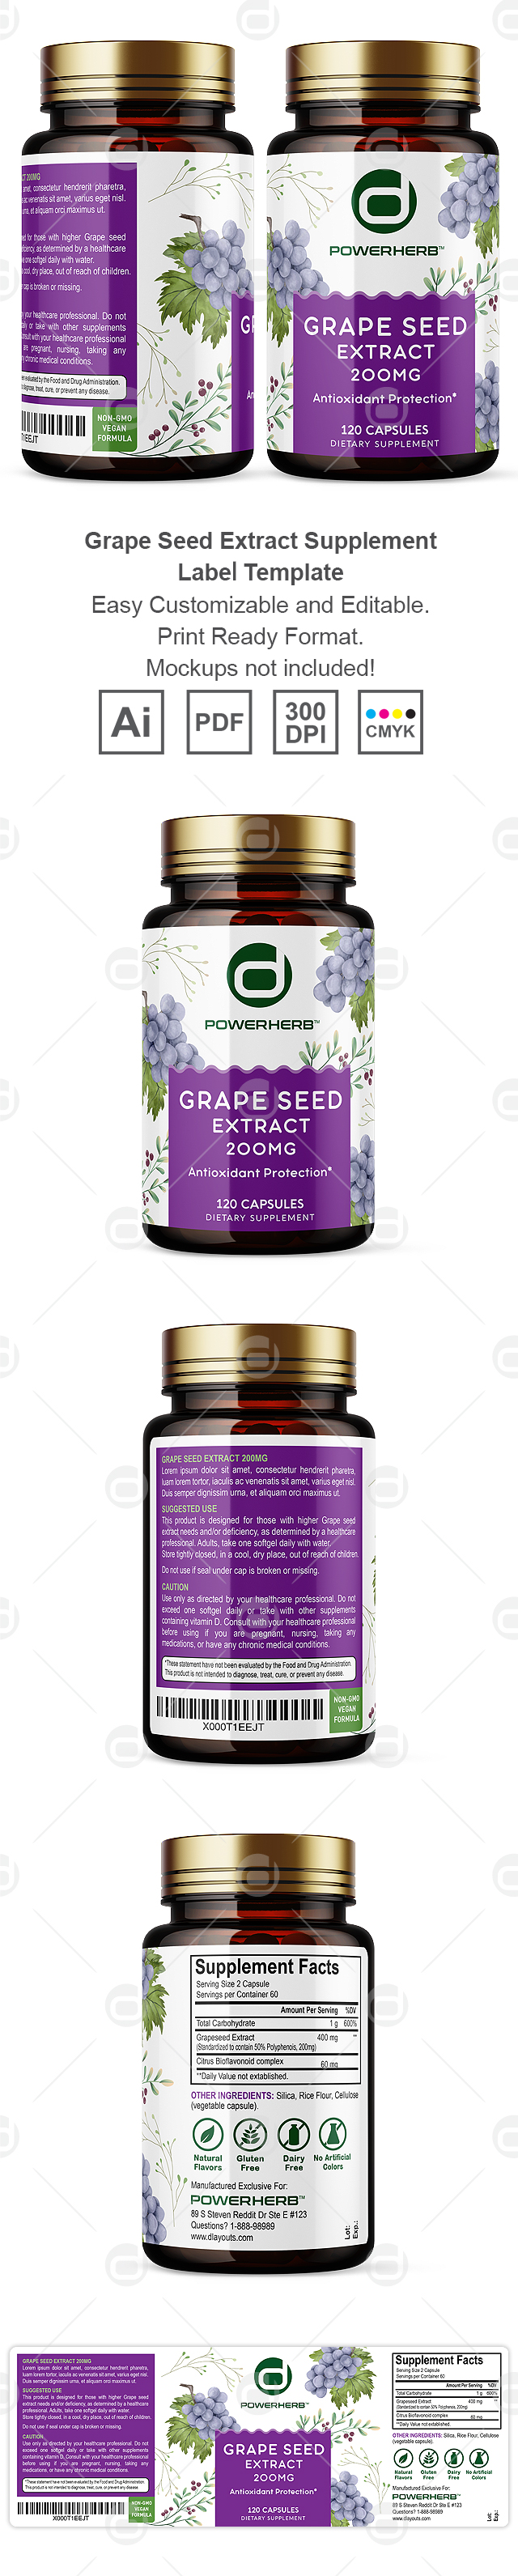 Grape Seed Extract Supplement Label Template